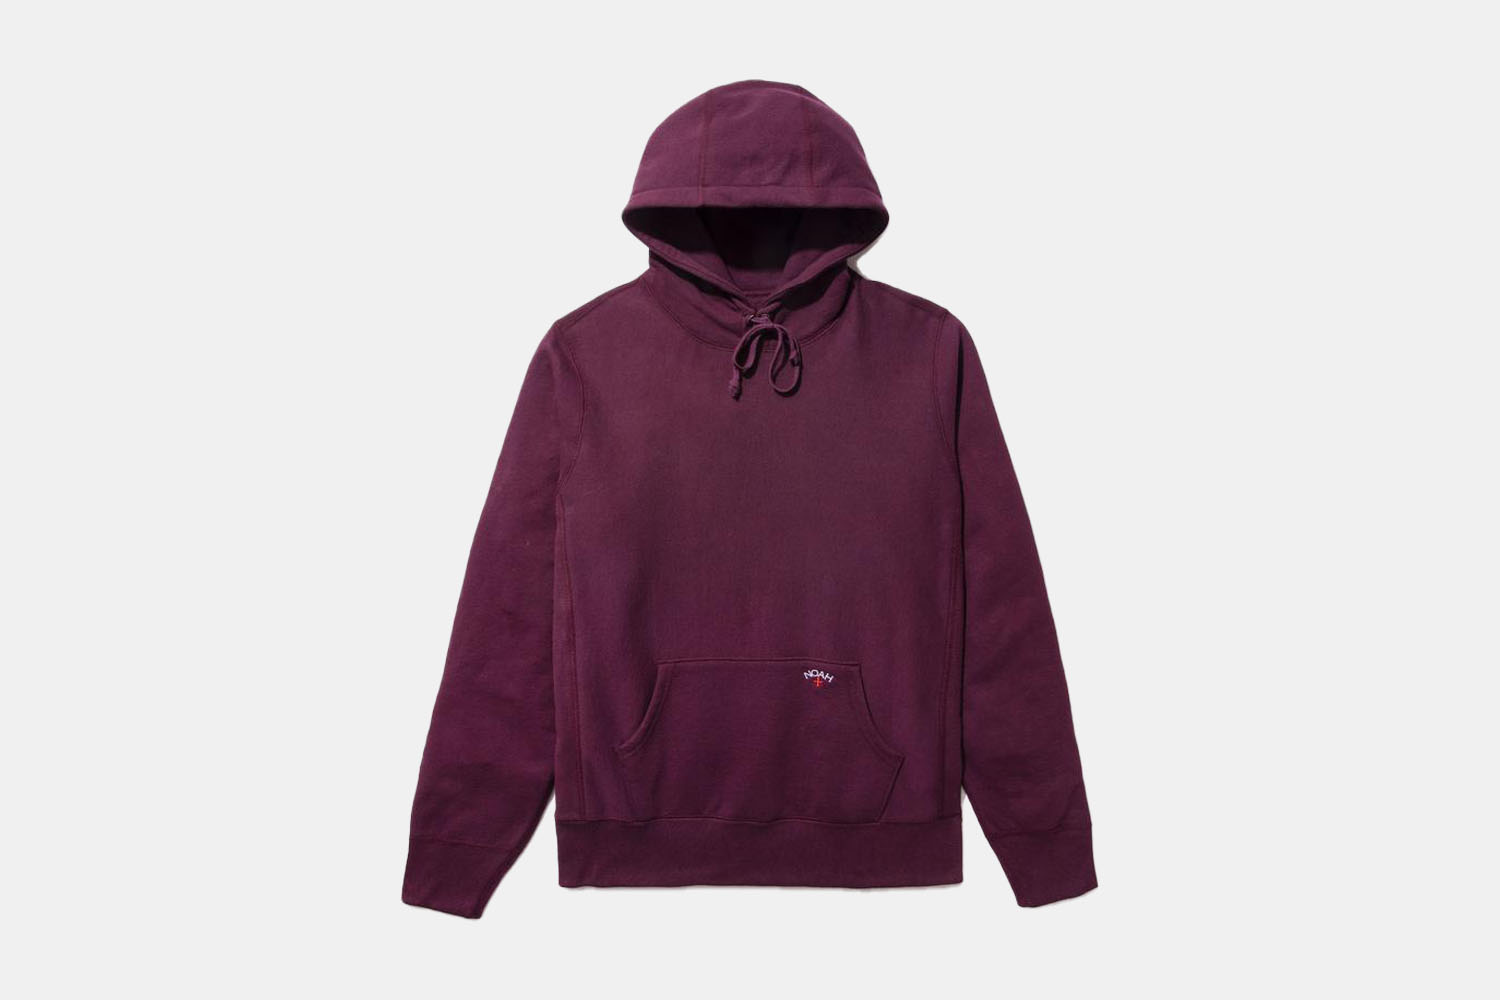 A plum colored hoodie